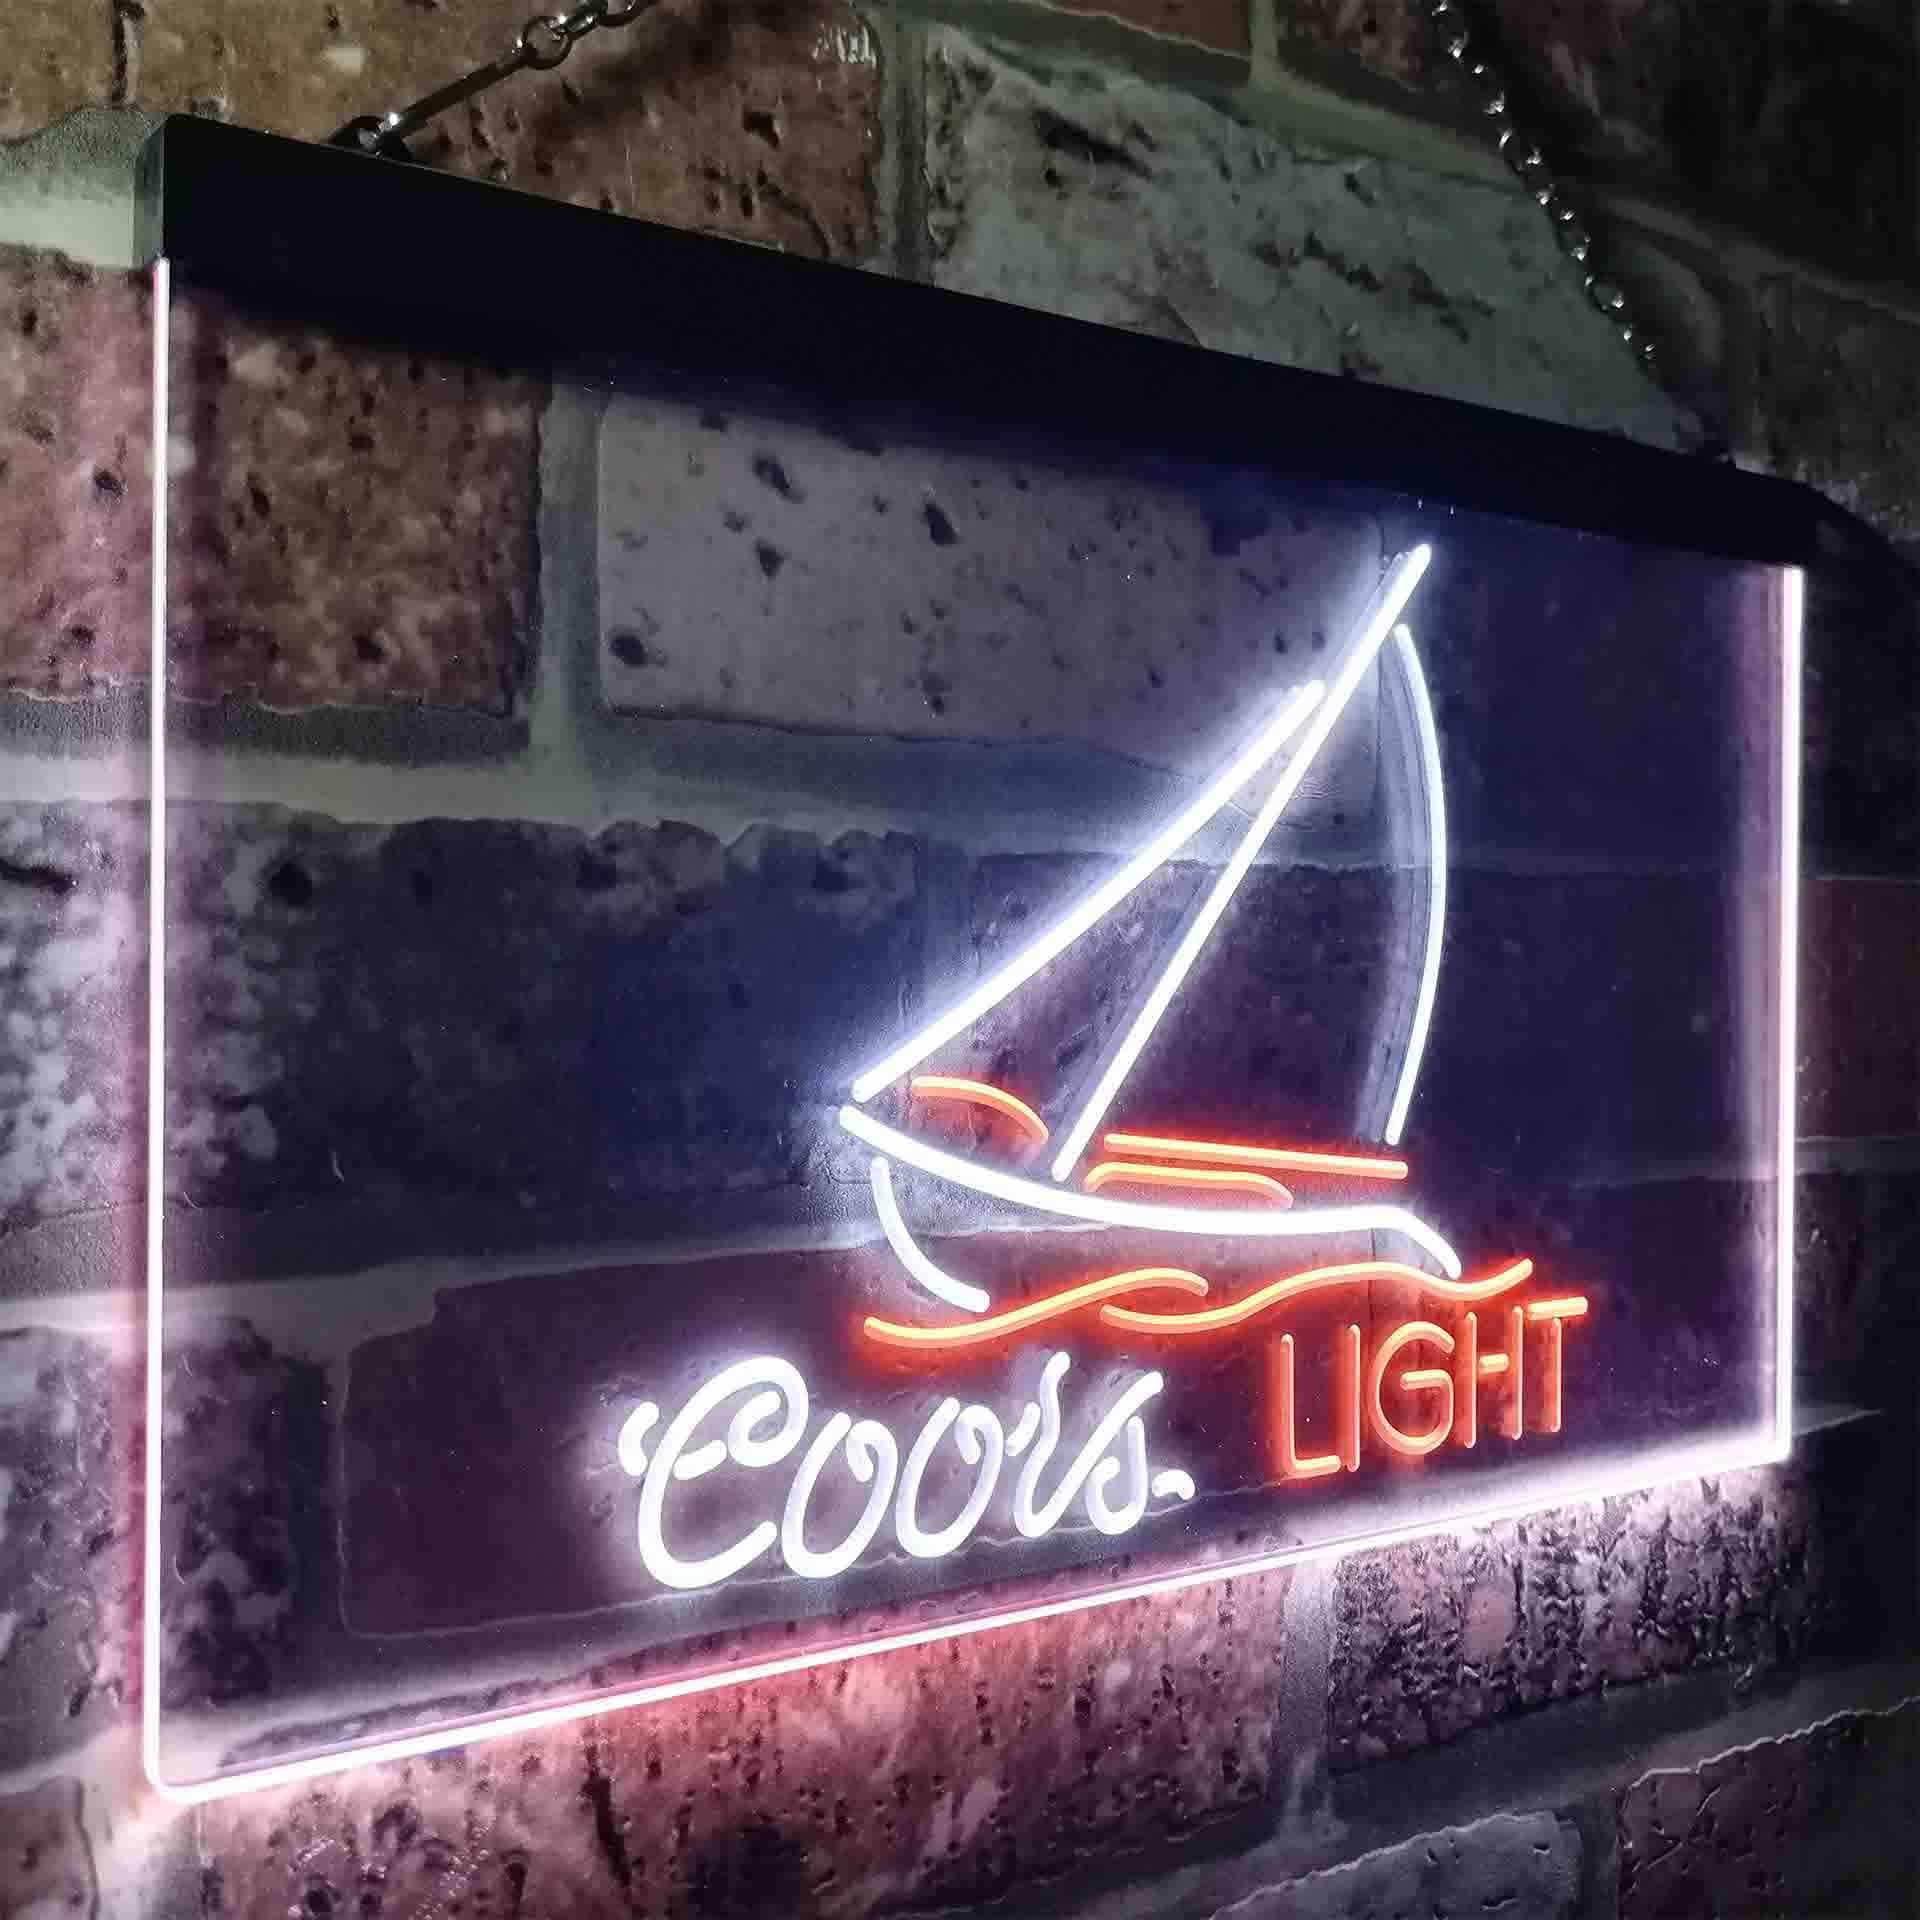 Coors Light Sailboat LED Neon Sign